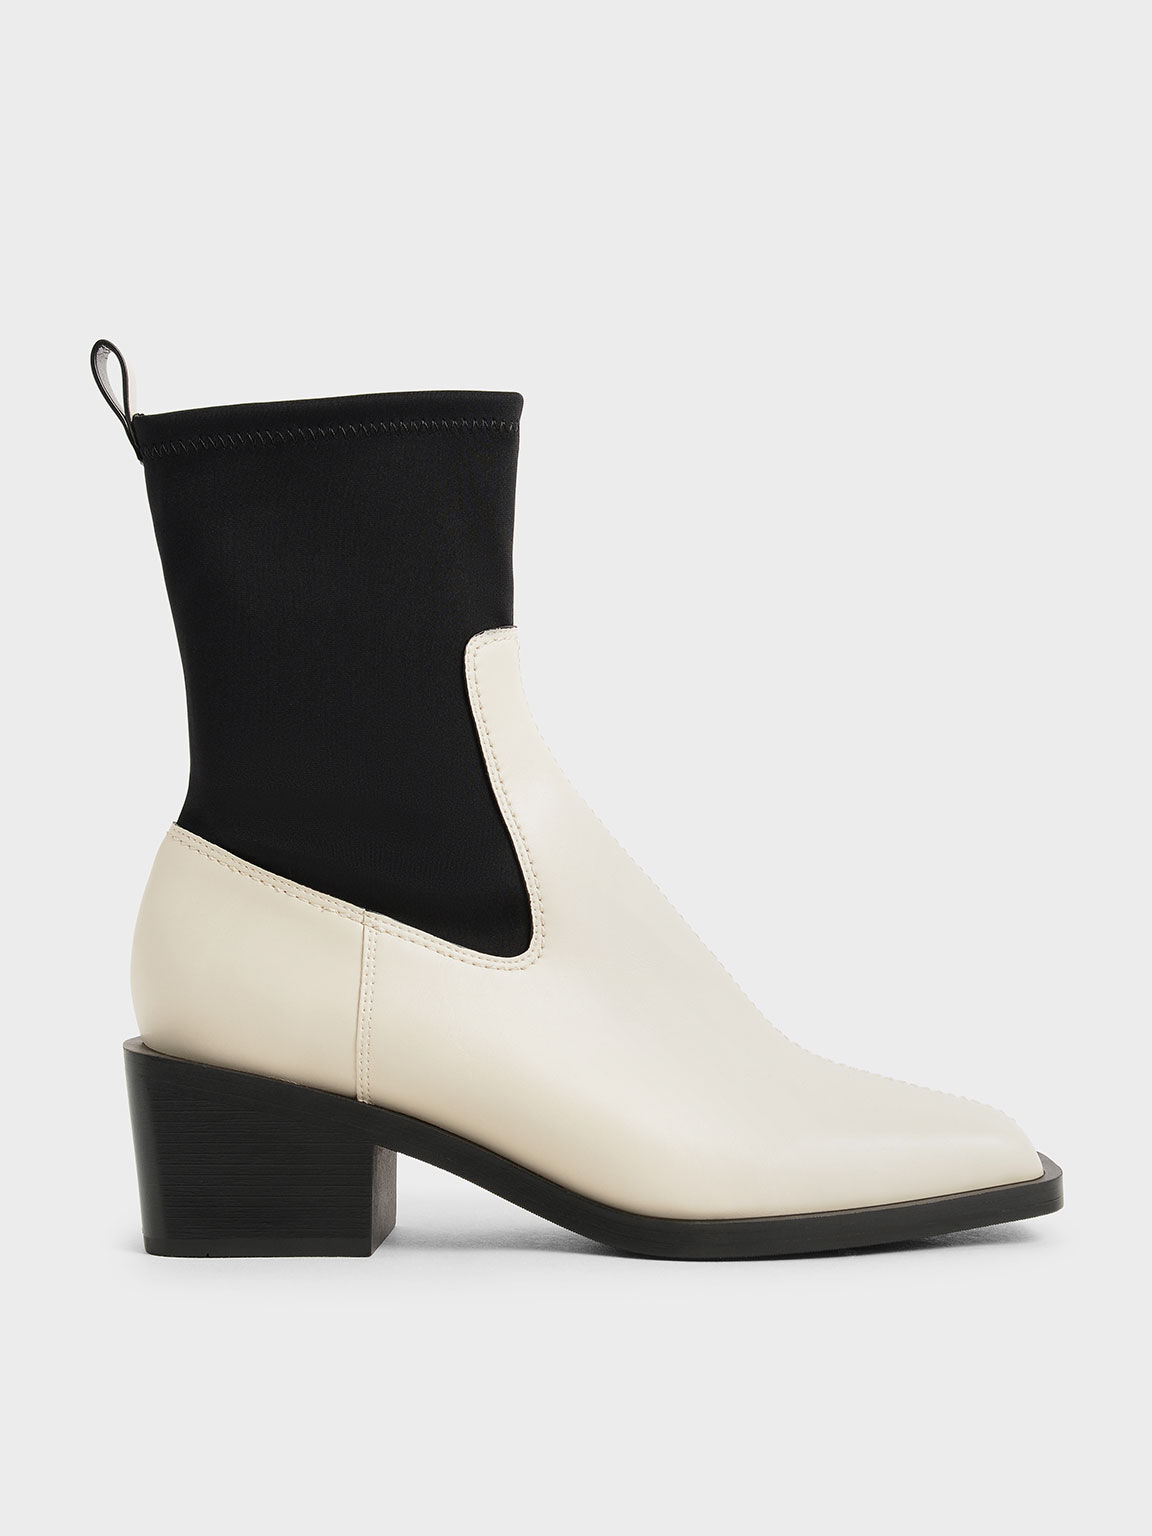 Charlies & Keith Two-Tone Sock Boots